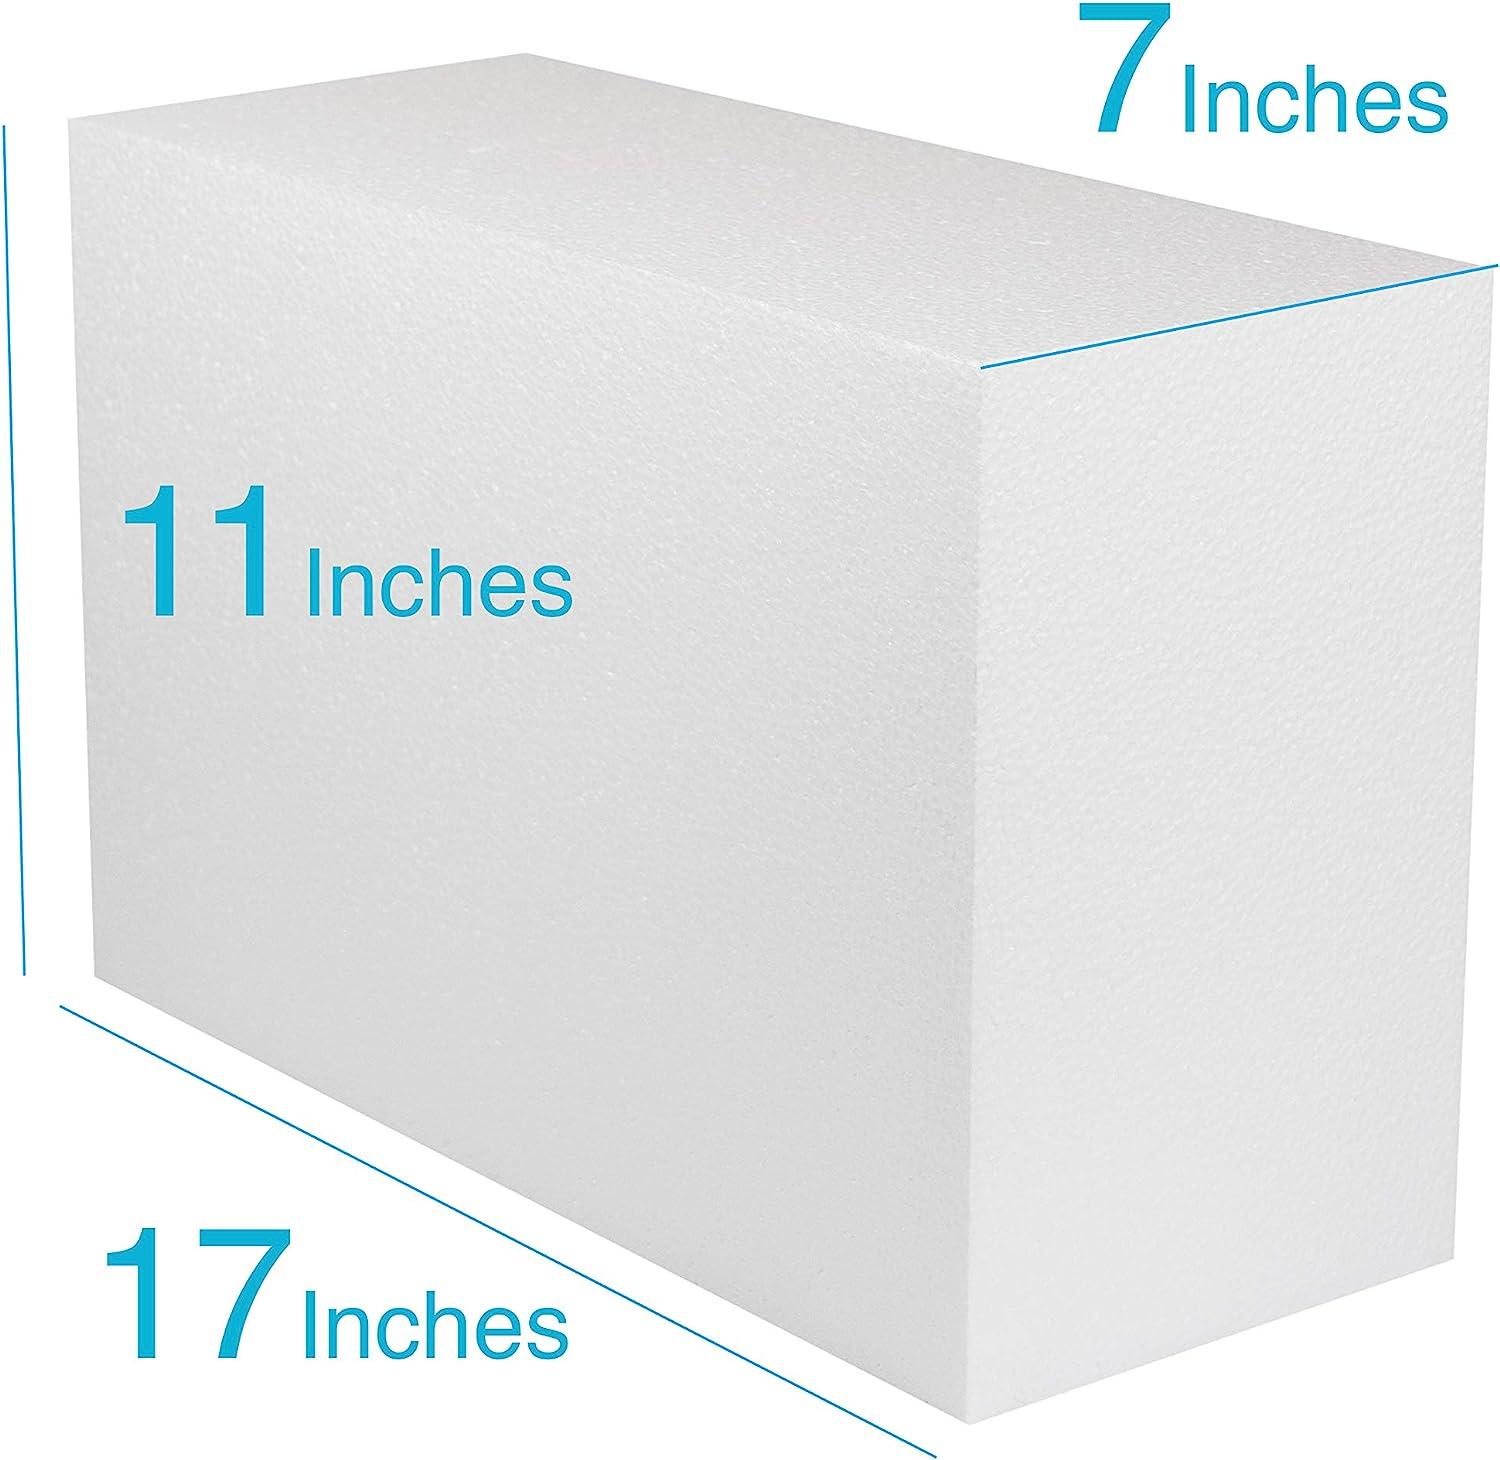 Silverlake Craft Foam Block - 9 Pack of 8x4x2 EPS Polystyrene Blocks for Crafting, Modeling, Art Projects and Floral Arrangements - Sculpting Panels